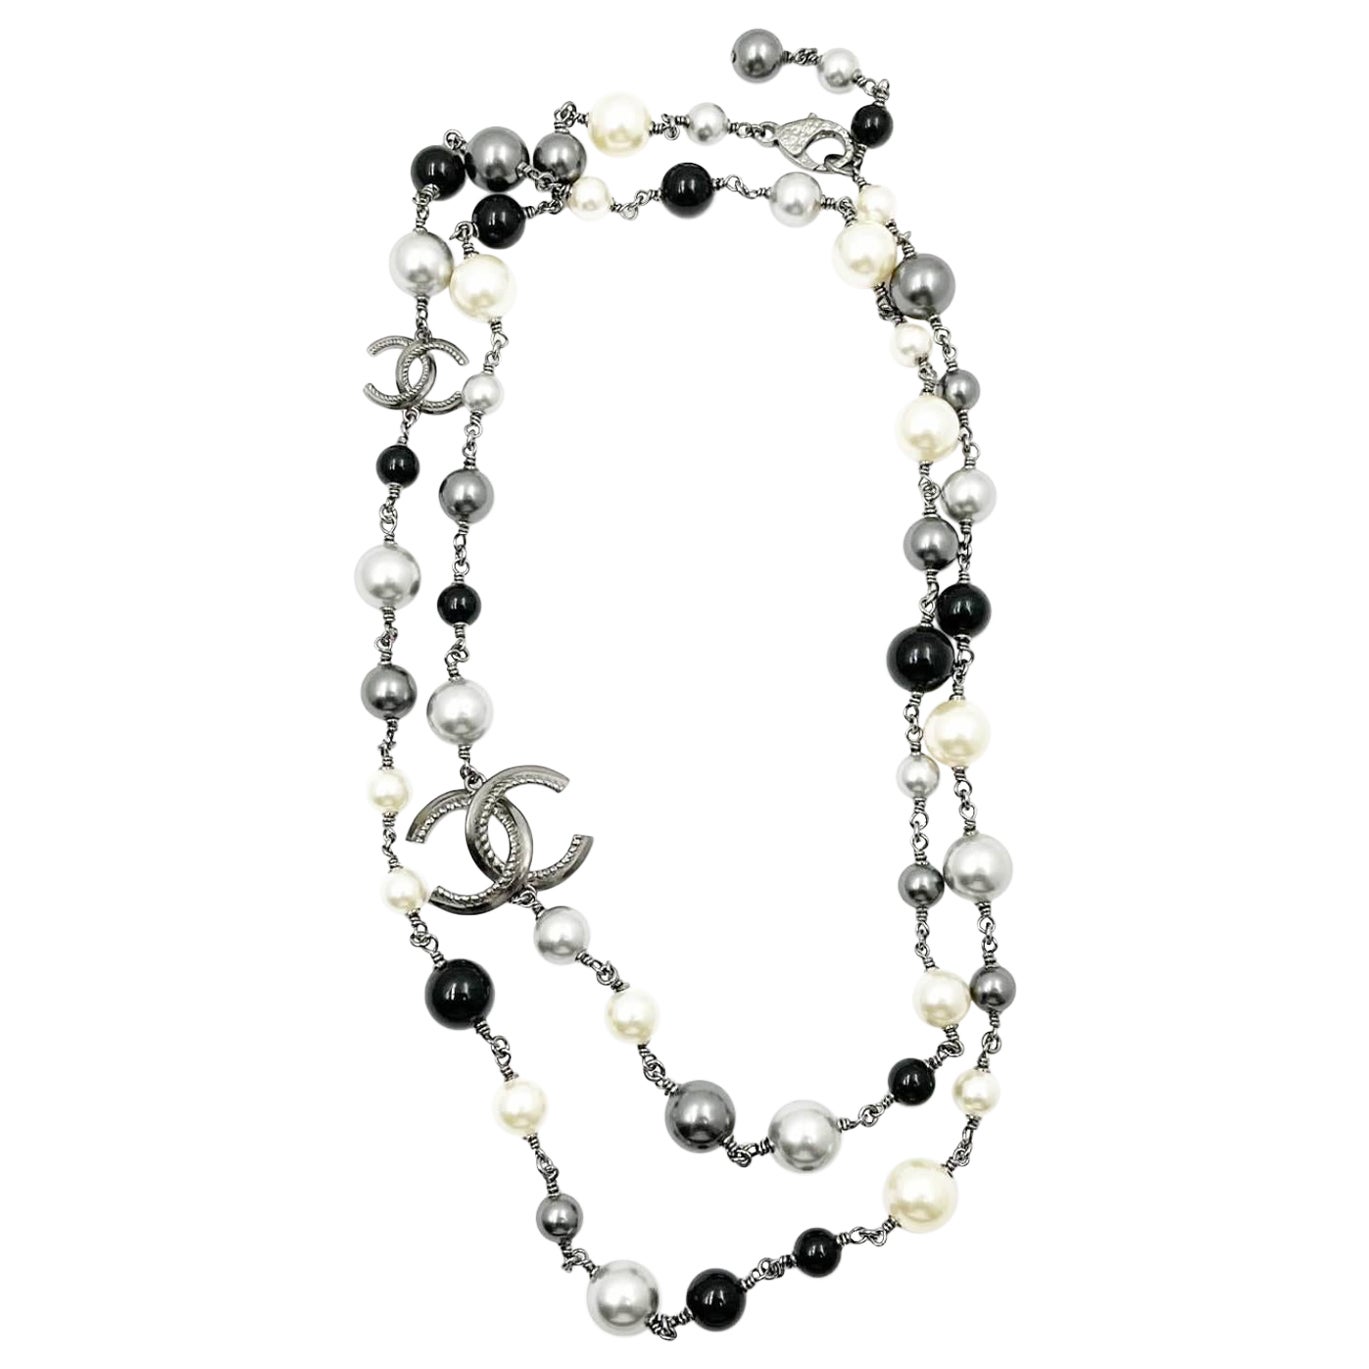 Chanel black pearl necklace  Black pearl necklace, Chanel